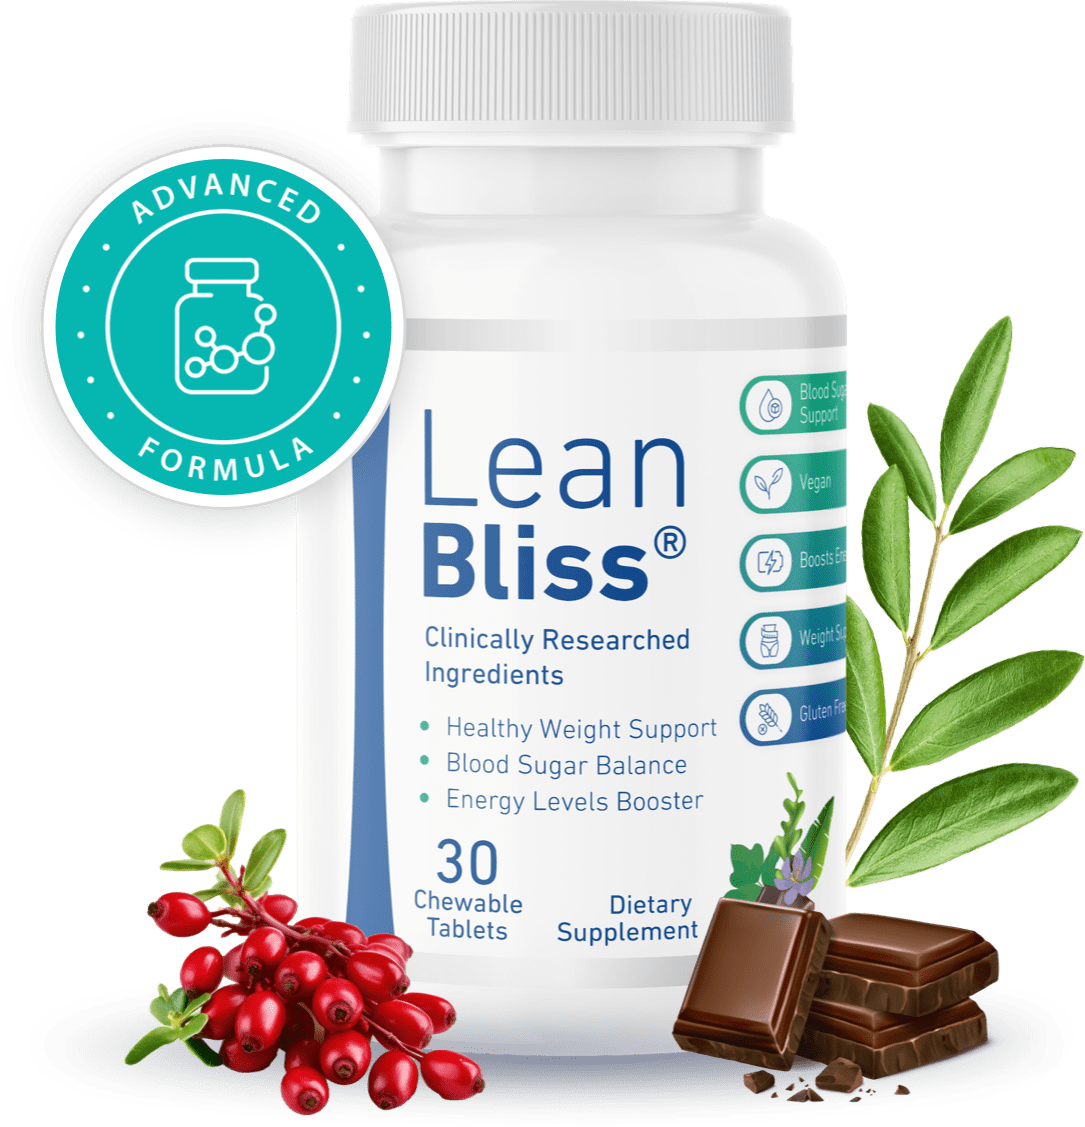 Lean Bliss A Natural Solution for Healthy Weight Loss and Stable Blood Sugar Levels